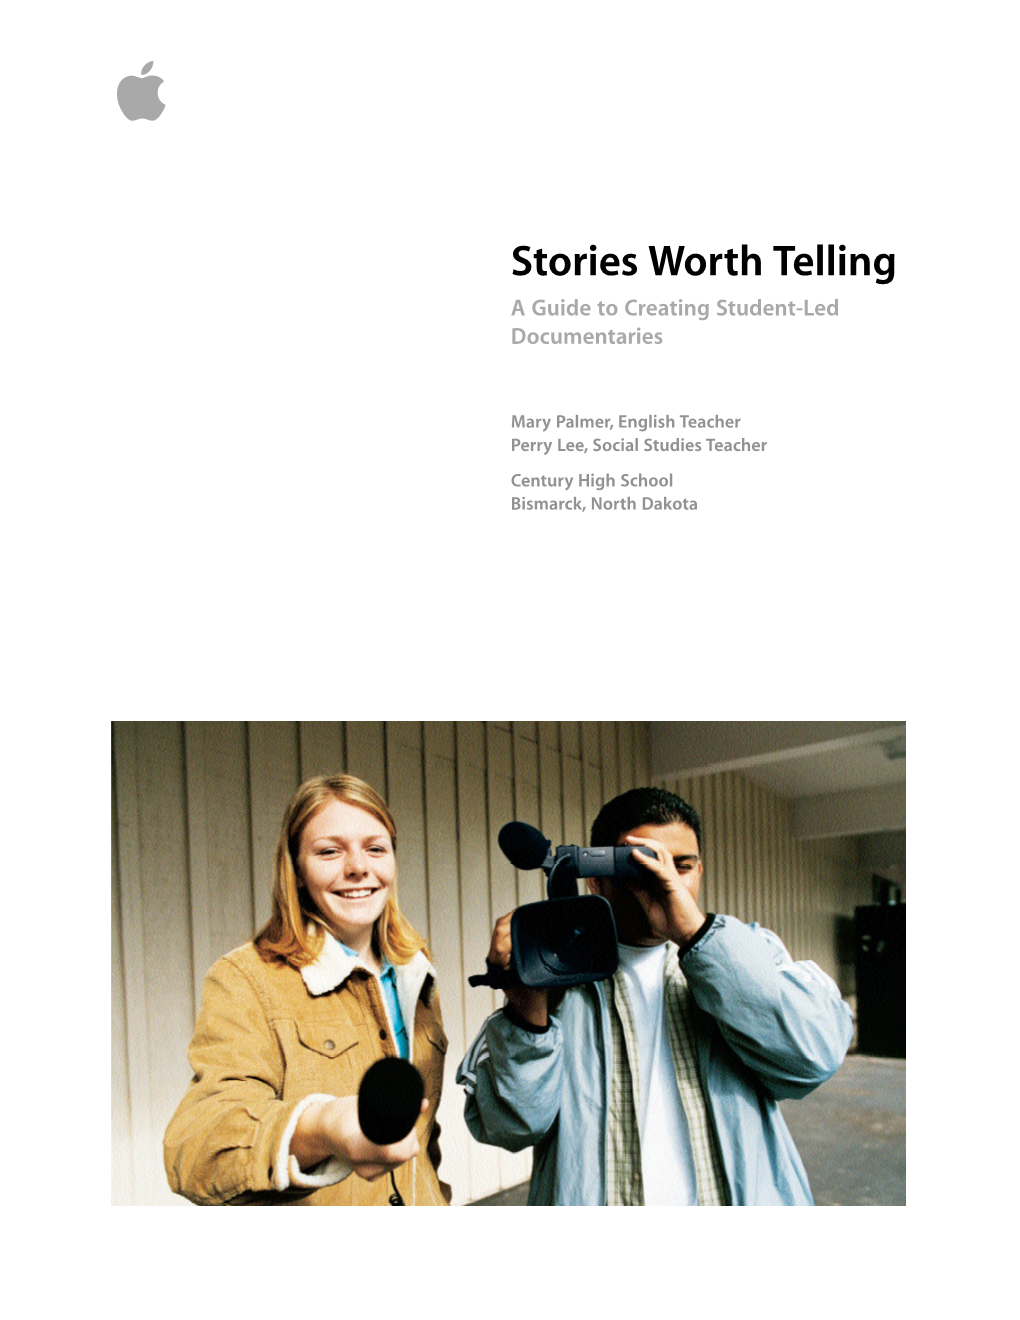 Stories Worth Telling a Guide to Creating Student-Led Documentaries